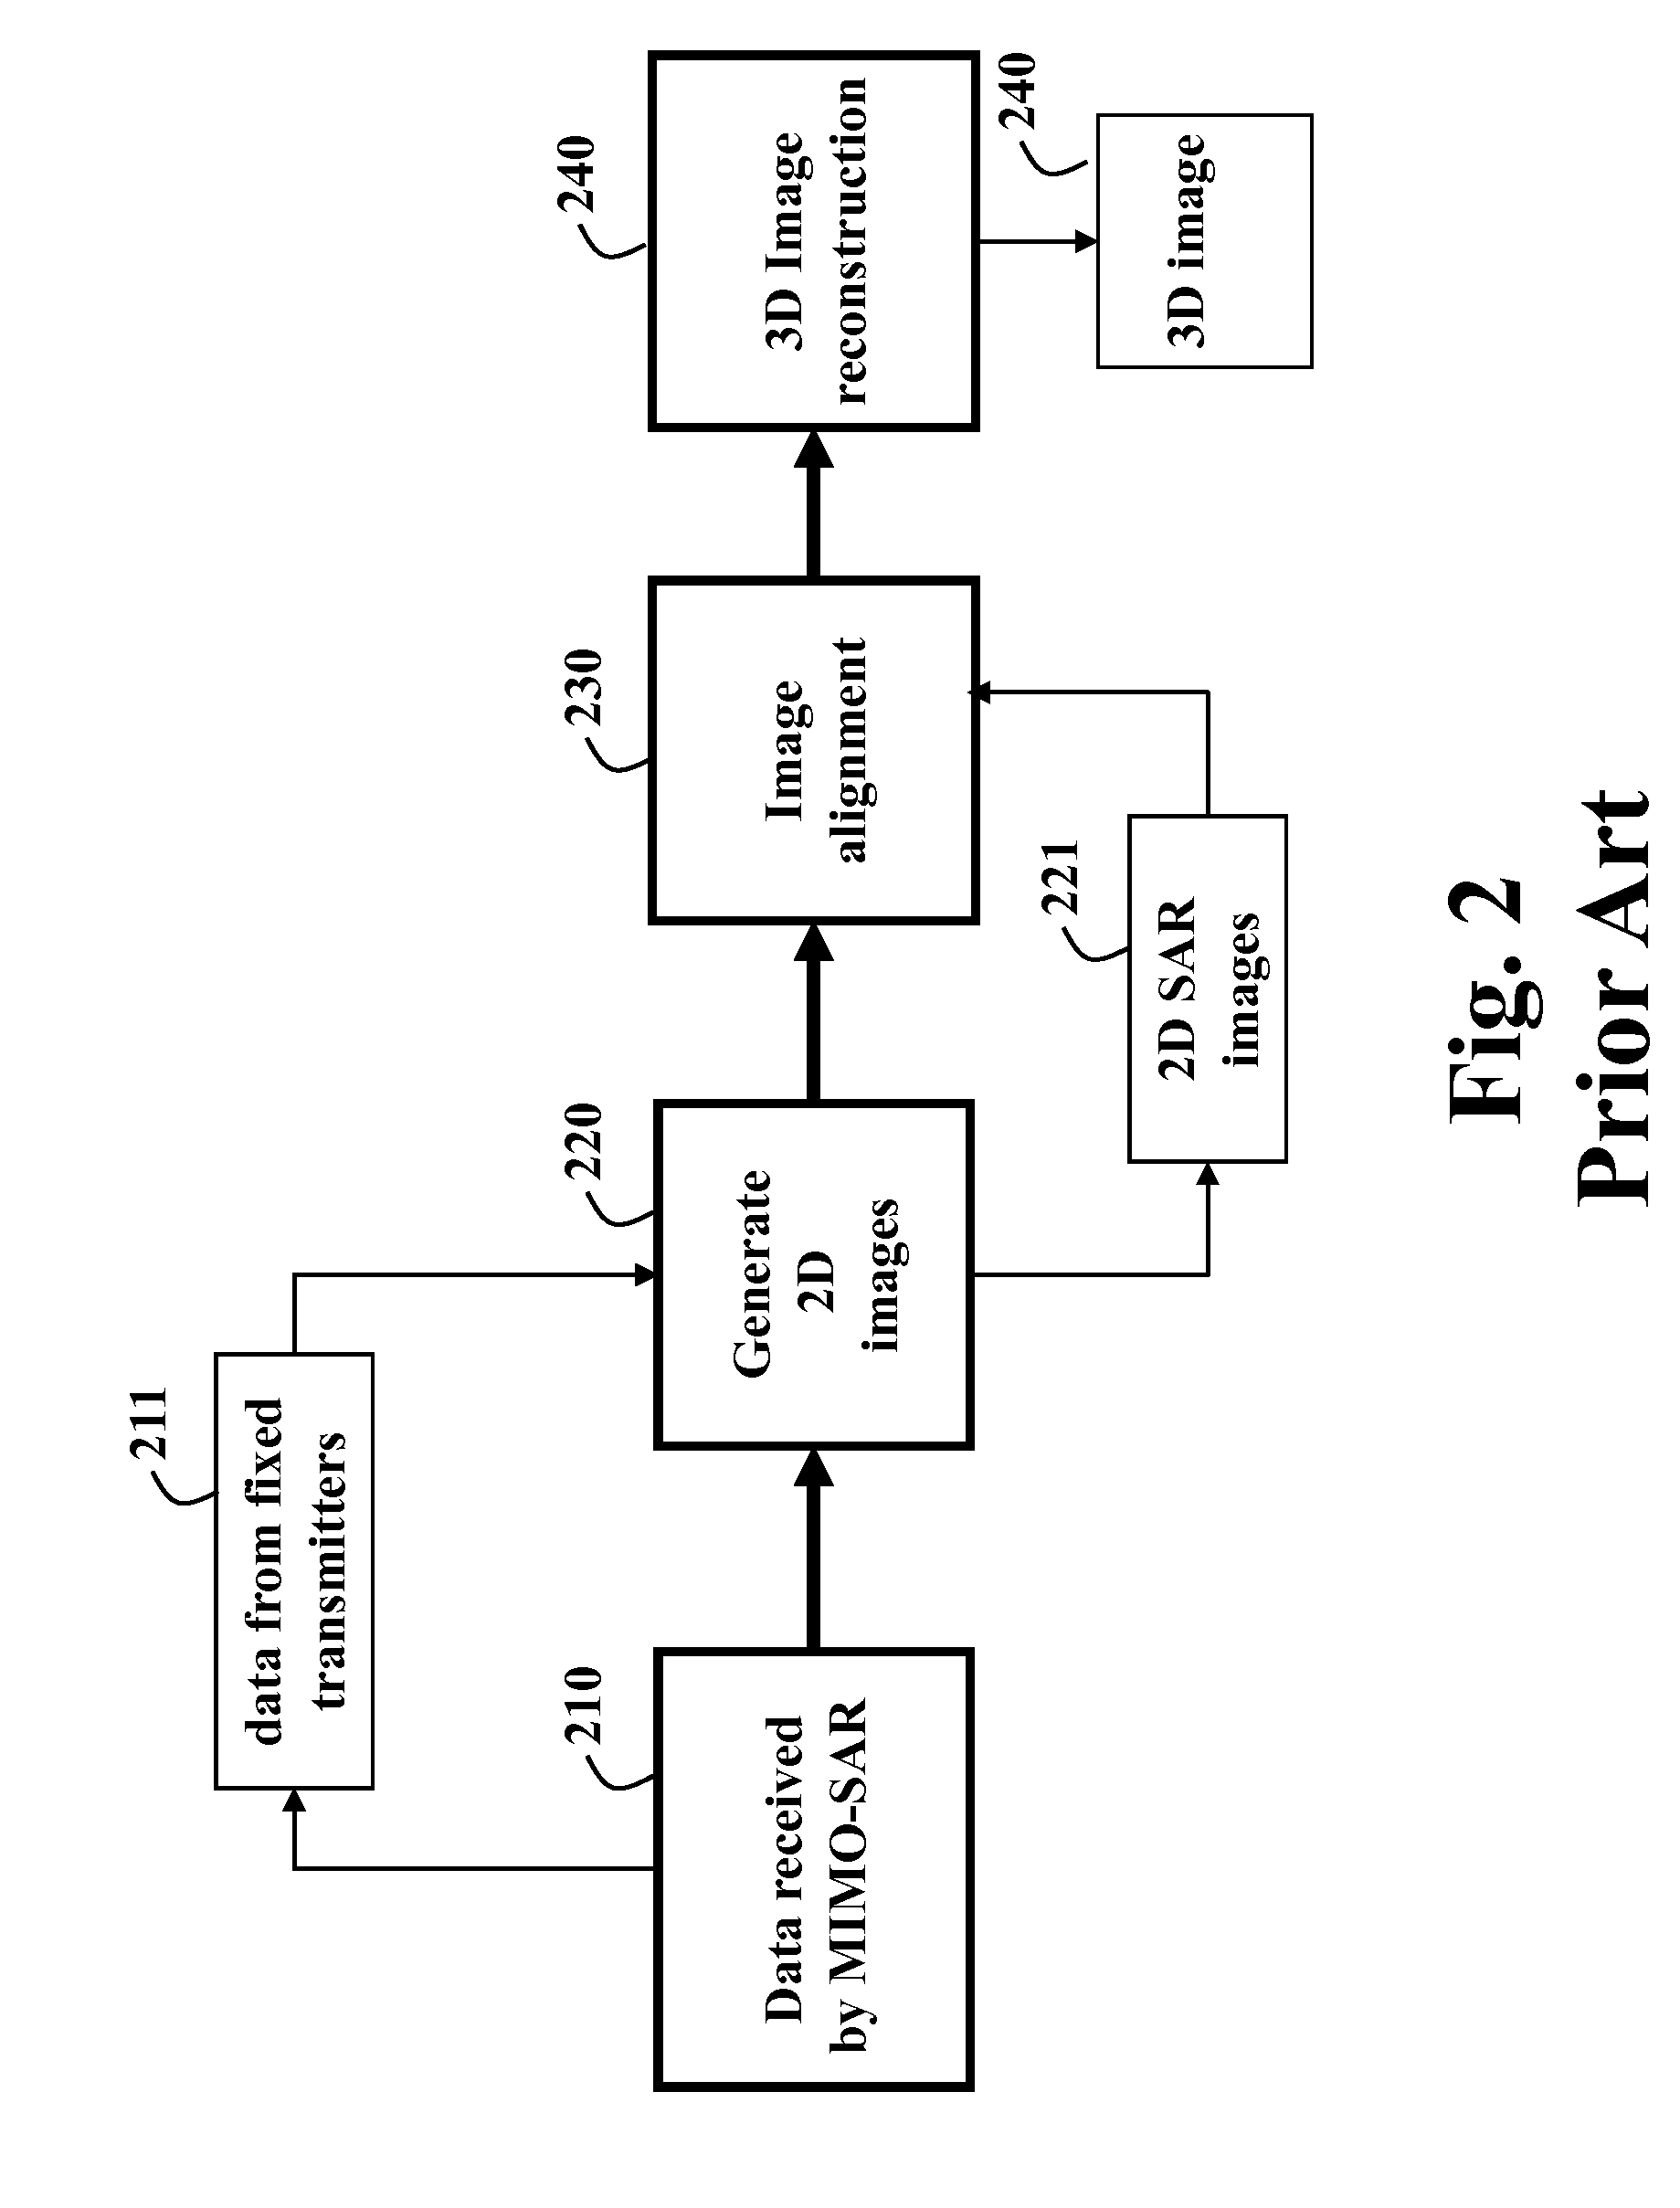 System and Method for 3D Imaging Using a Moving Multiple-Input Multiple-Output (MIMO) Linear Antenna Array